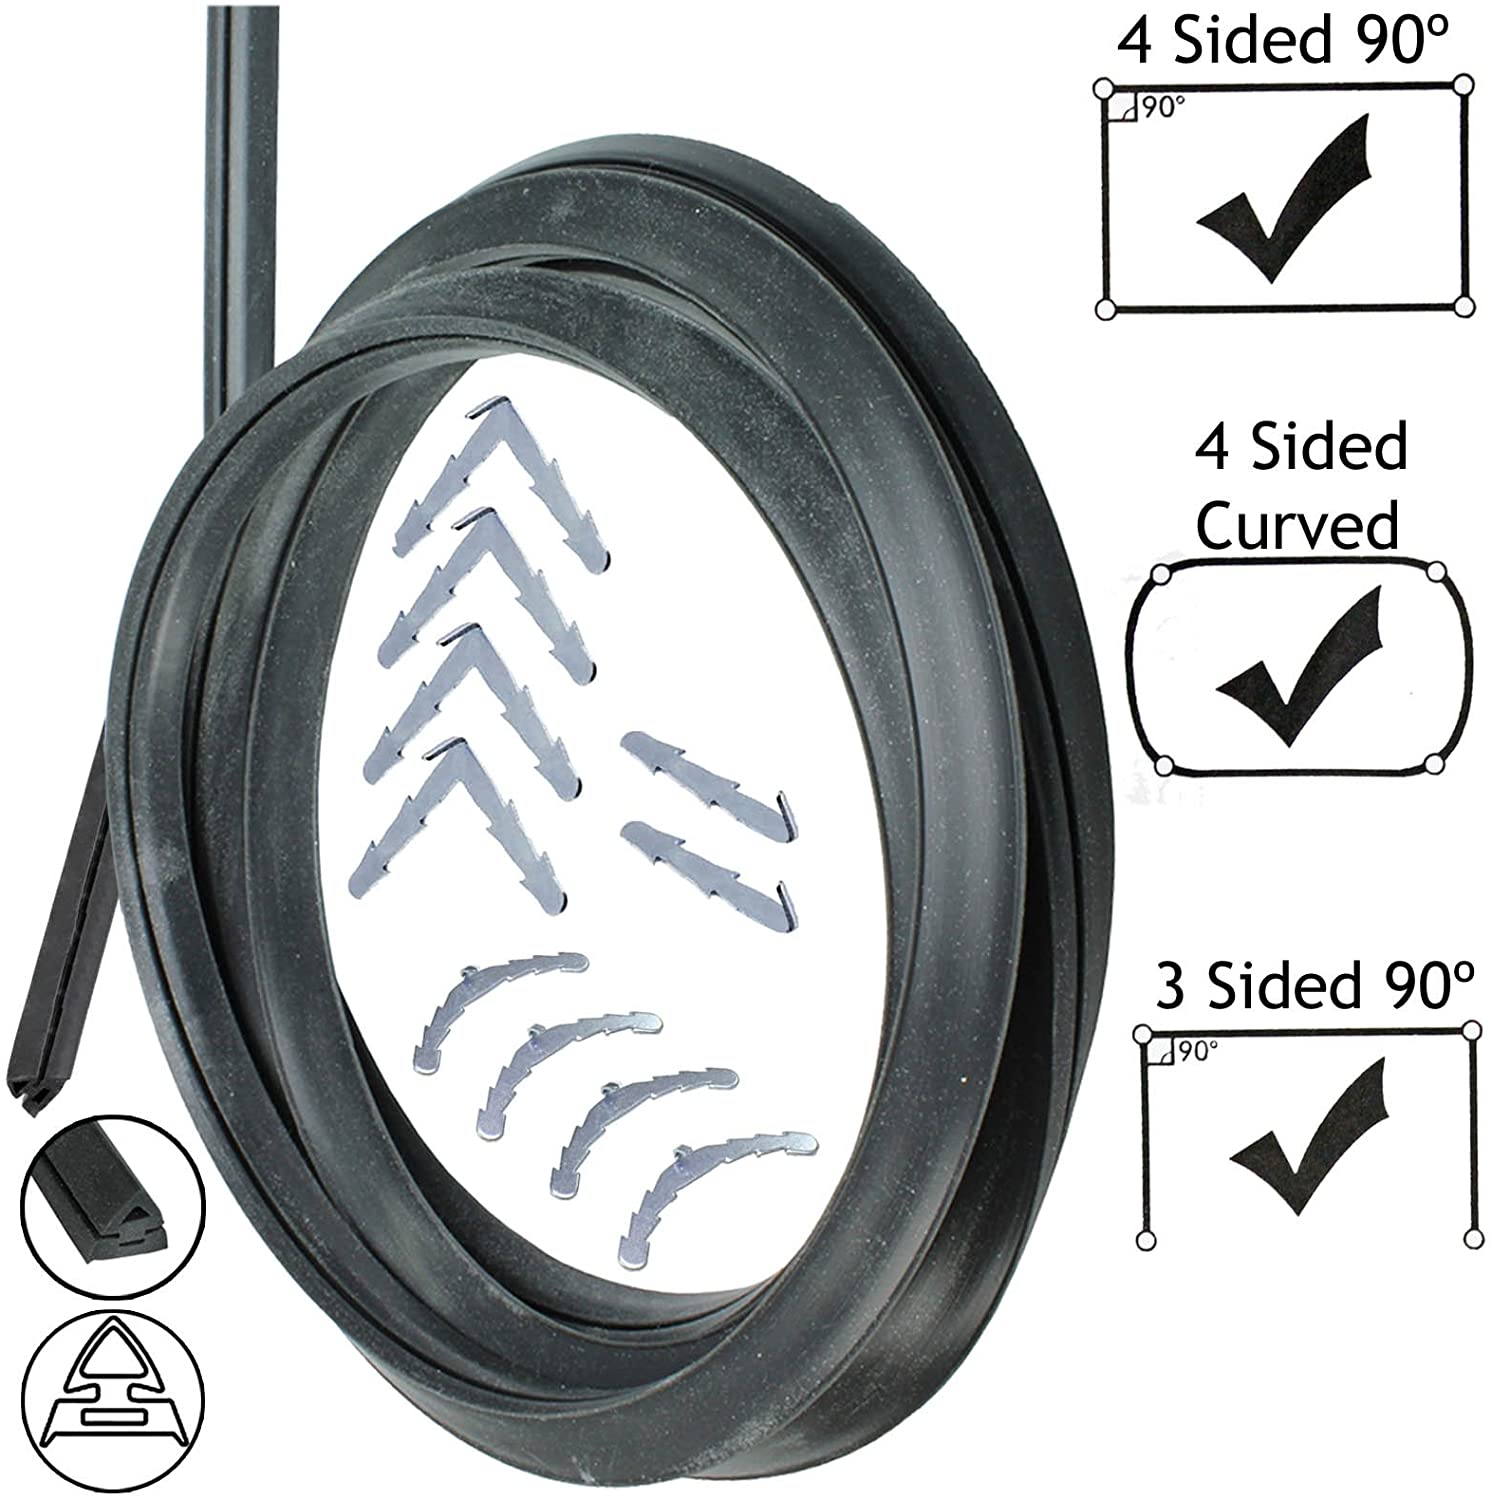 3m Cut to Size Door Seal for Prestige 3 or 4 Sided Oven Cooker (Rounded or 90º Clips)